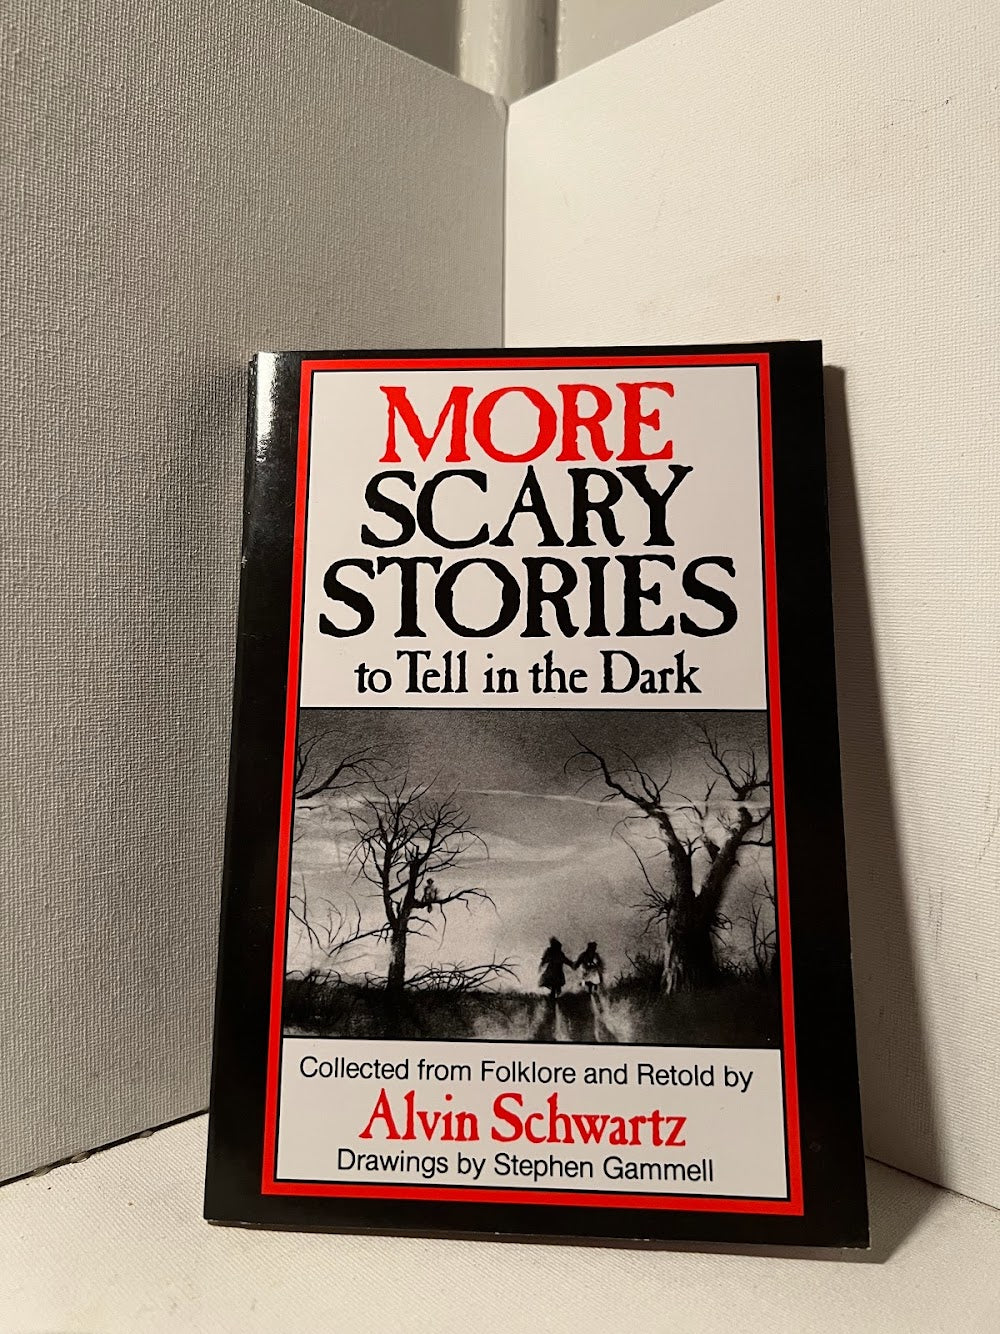 Scary Stories to Tell in the Dark (3vol.)